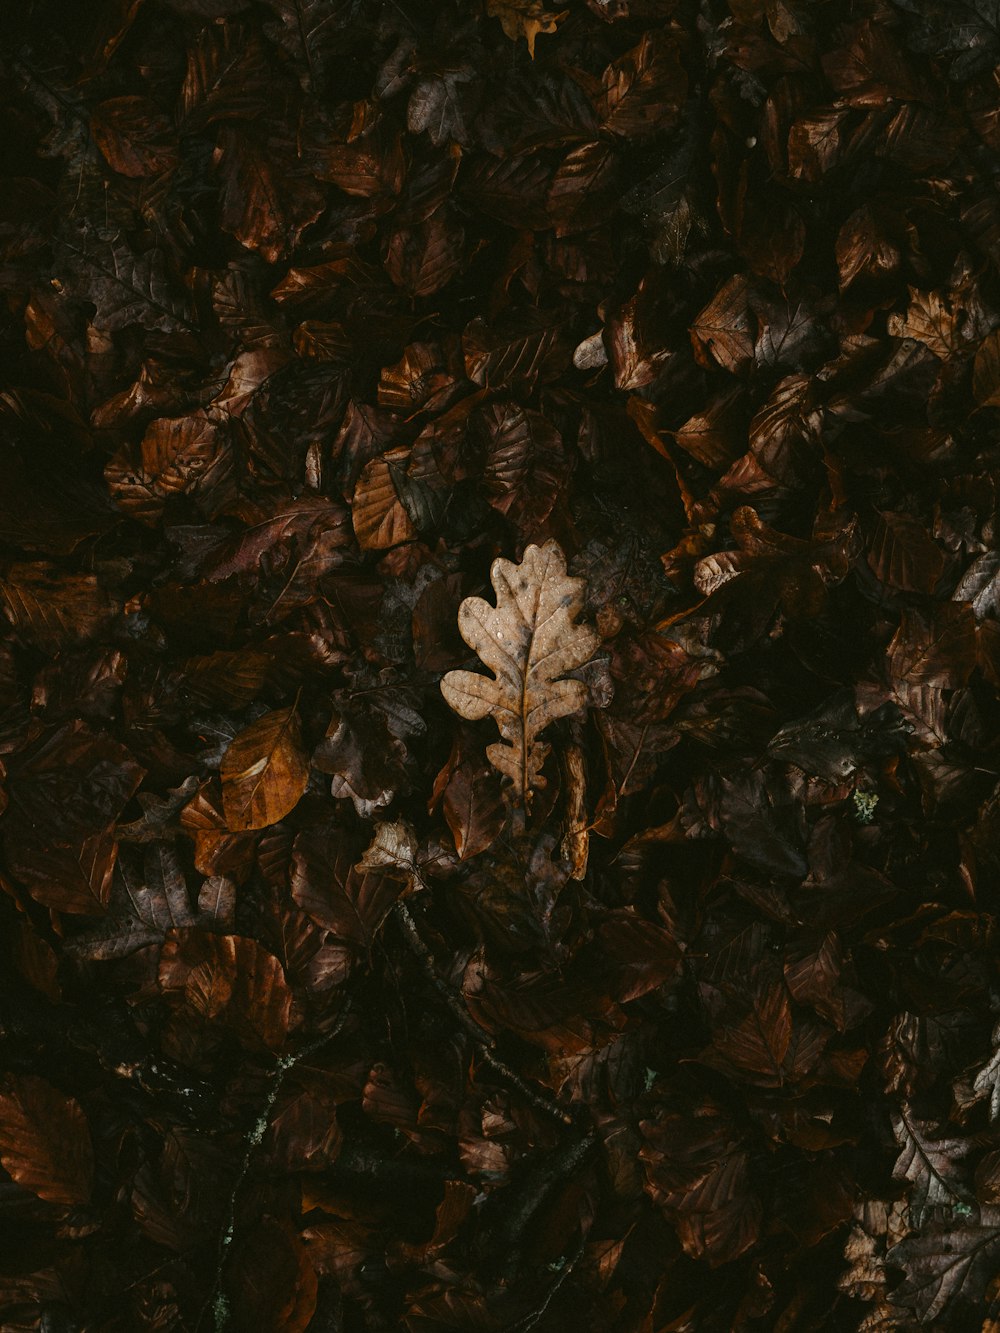 withered leaf on ground